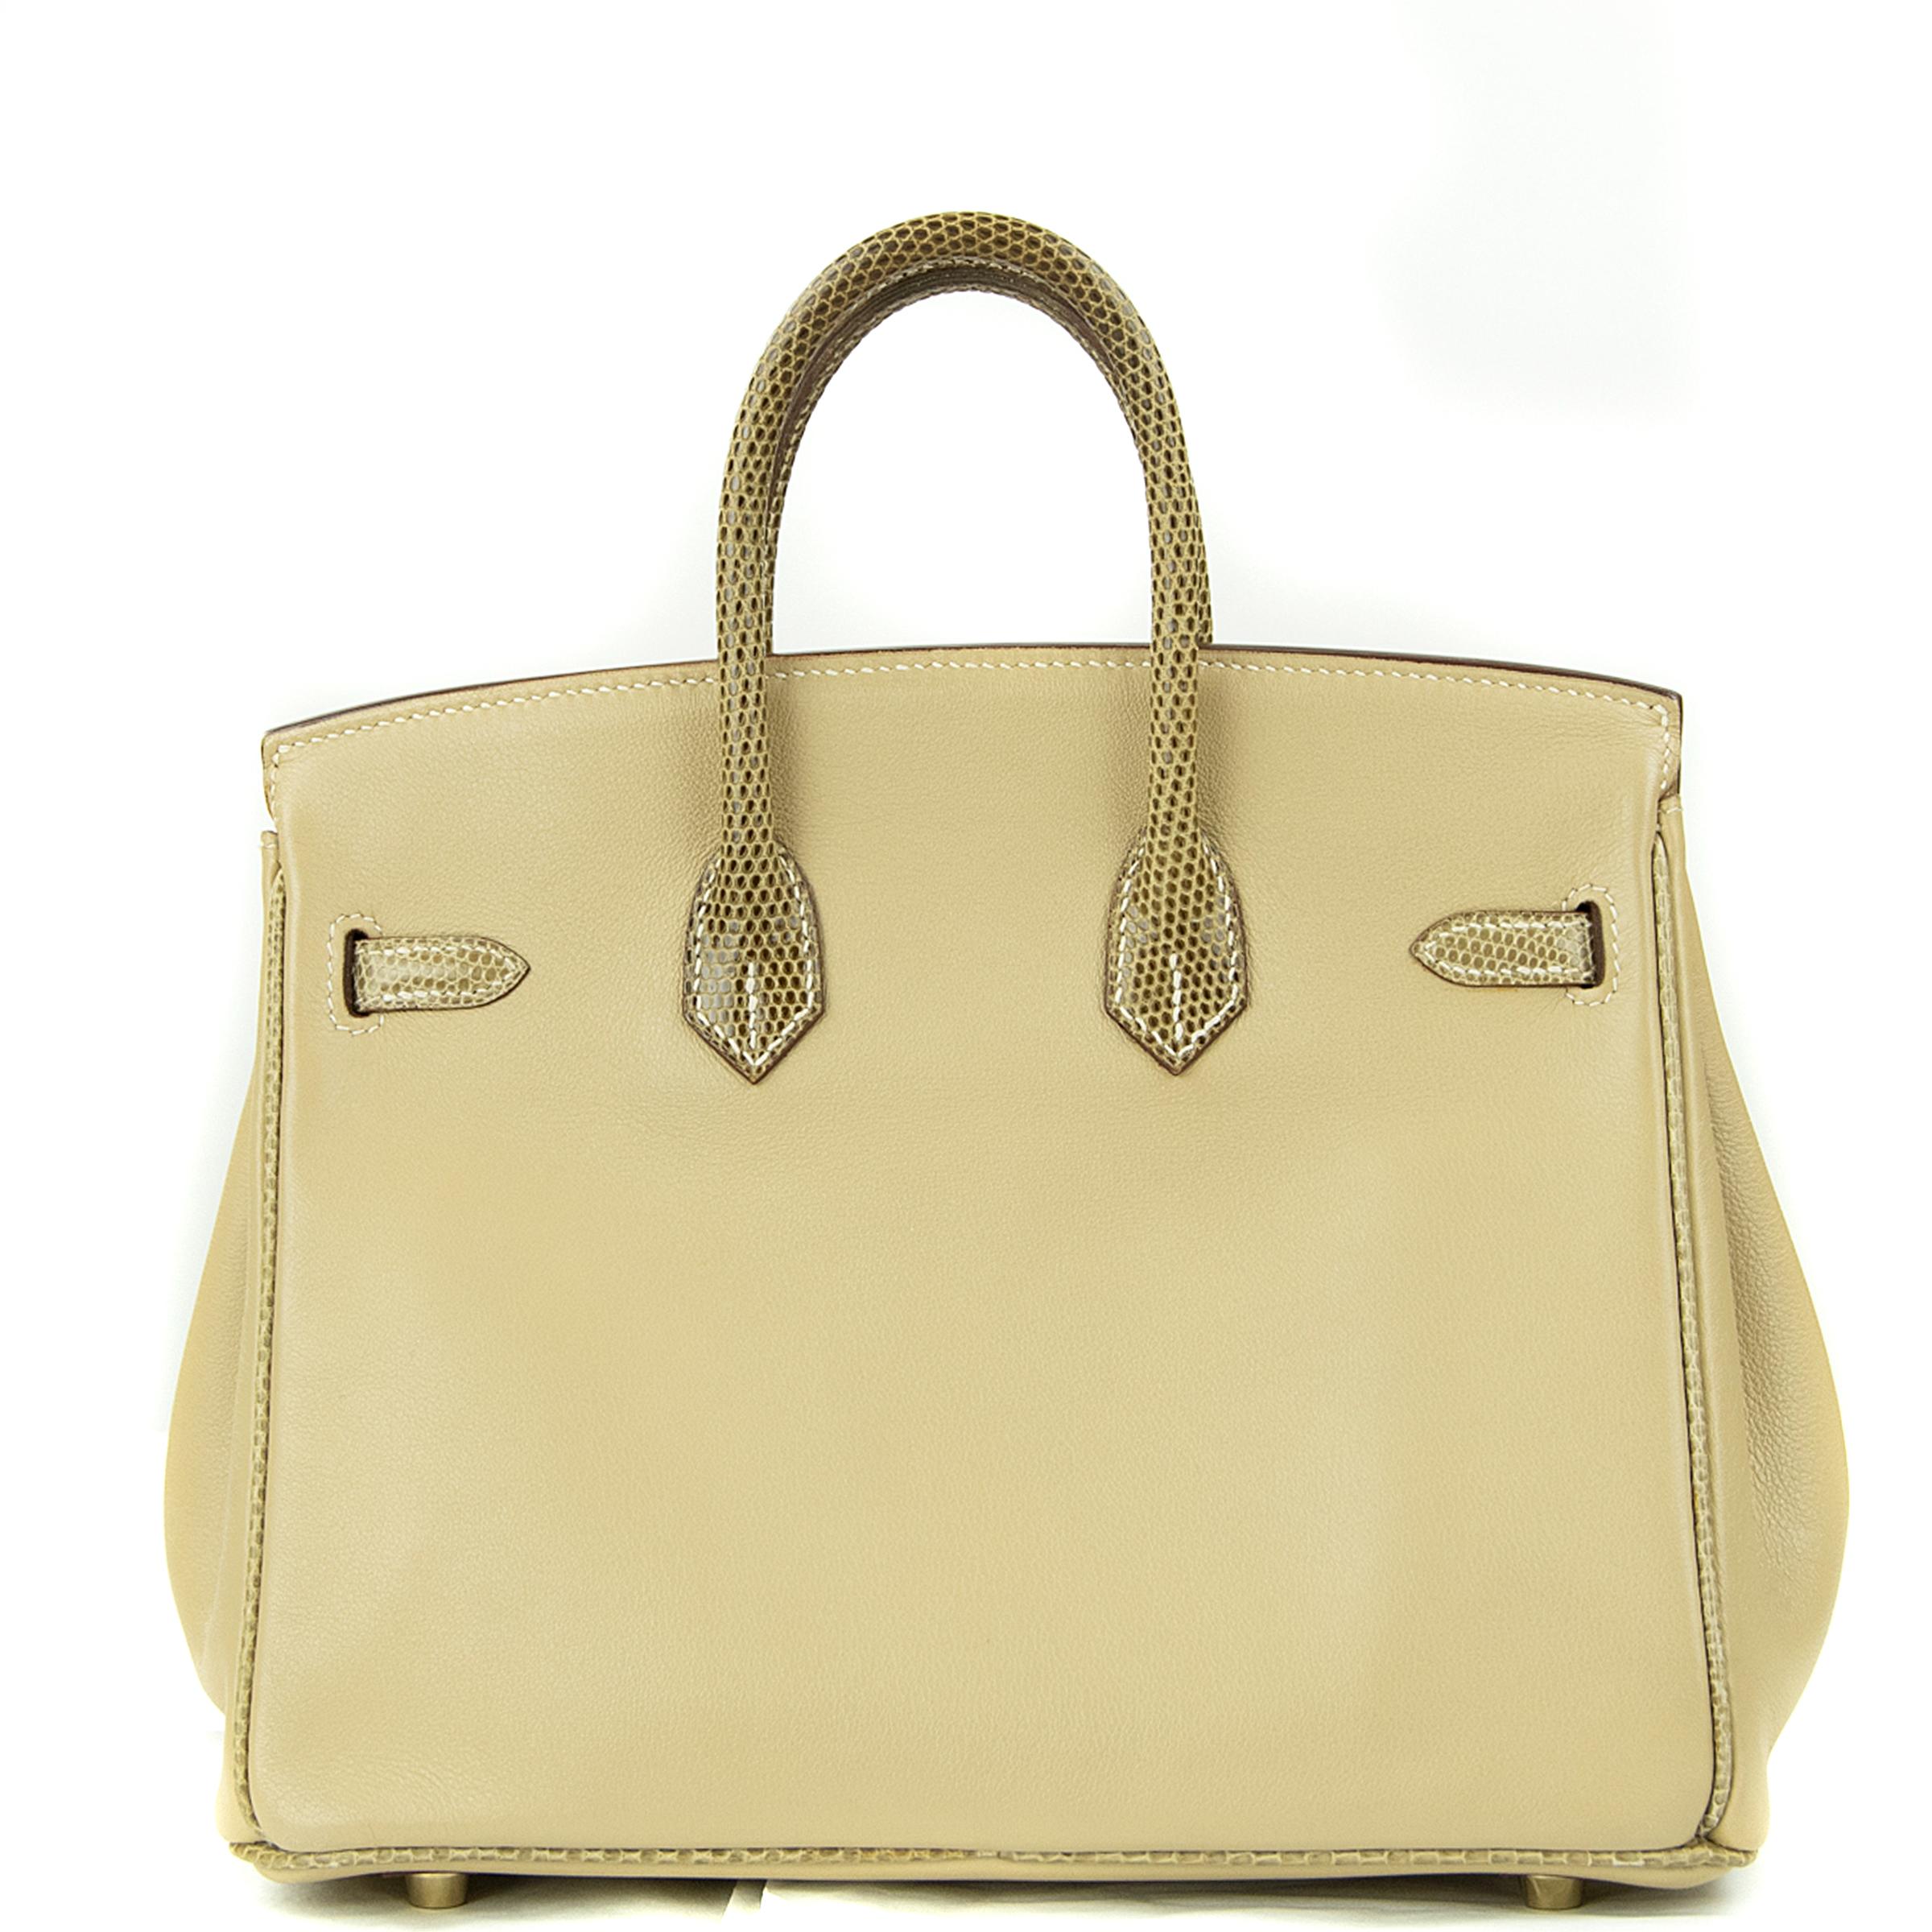 Hermes 25cm Birkin in Argile Swift Leather and Ficelle Lizard. This iconic special order Hermes Birkin bag is timeless and chic. Fresh and crisp with gold hardware.

    Condition: New or Never Used
    Made in France
    Bag Measures: 25cm (9.8